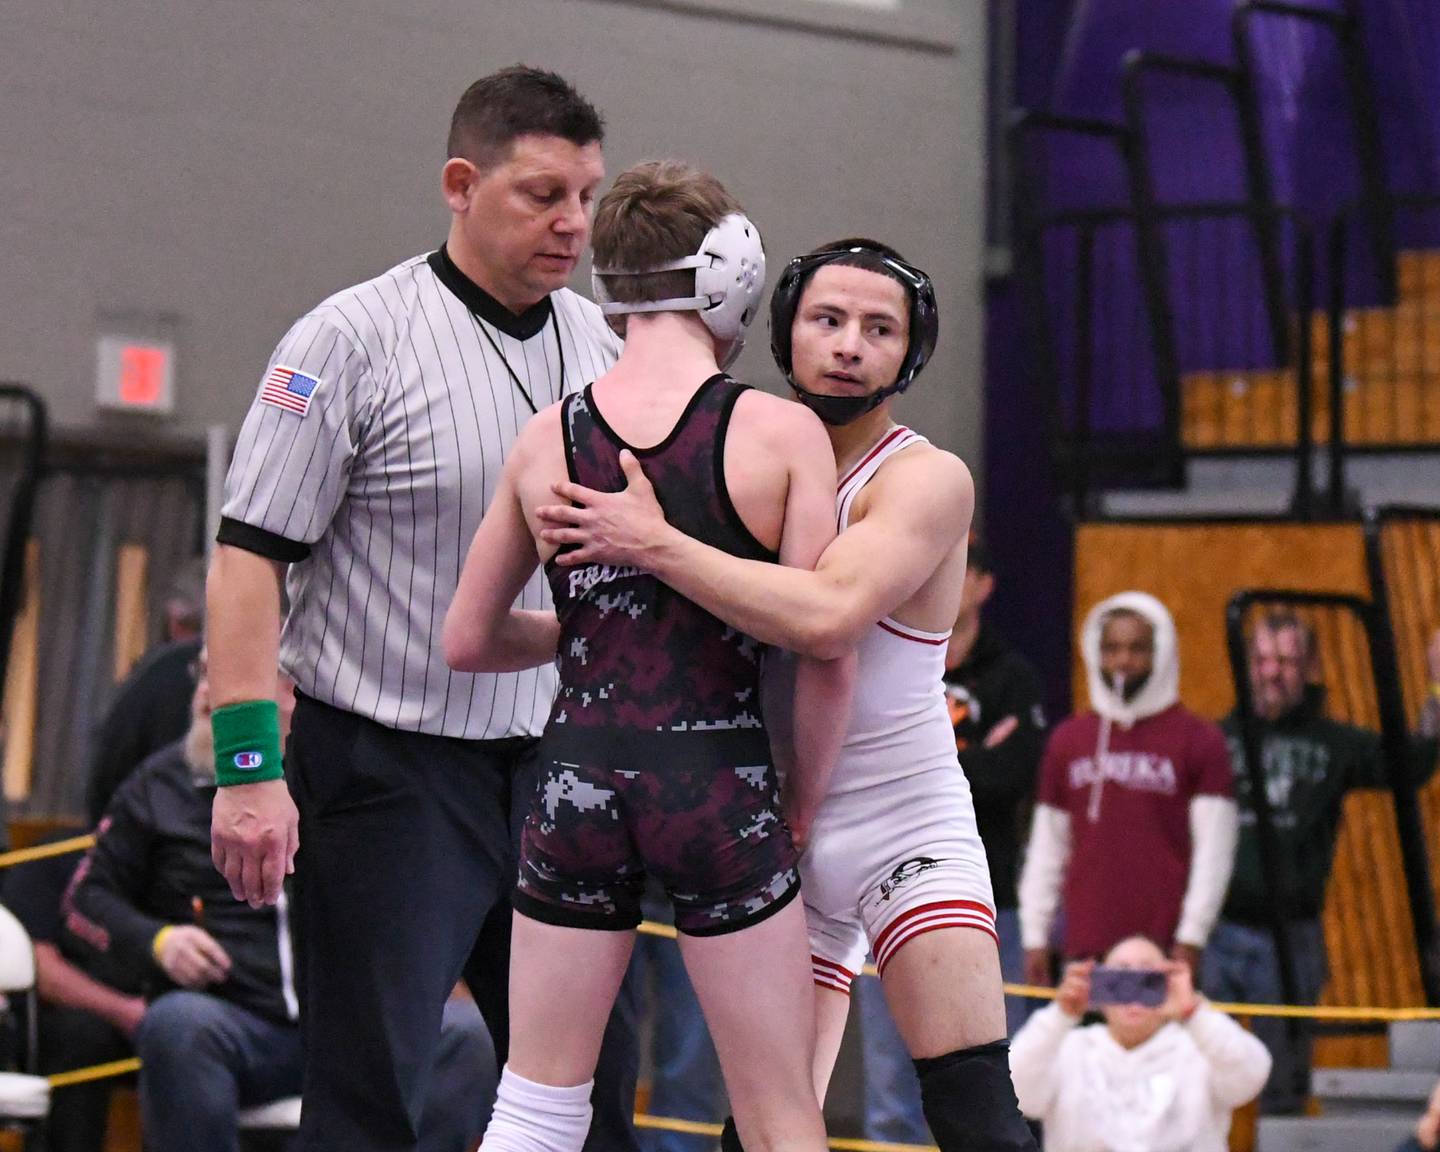 Ottawa's Ivan Munoz (right) hugs Jake Lowitzki, of Prairie Ridge, after winning the 106-pound third-place match in the Class 2A Rochelle Sectional on Saturday, Feb. 11, 2023 at Rochelle High School.